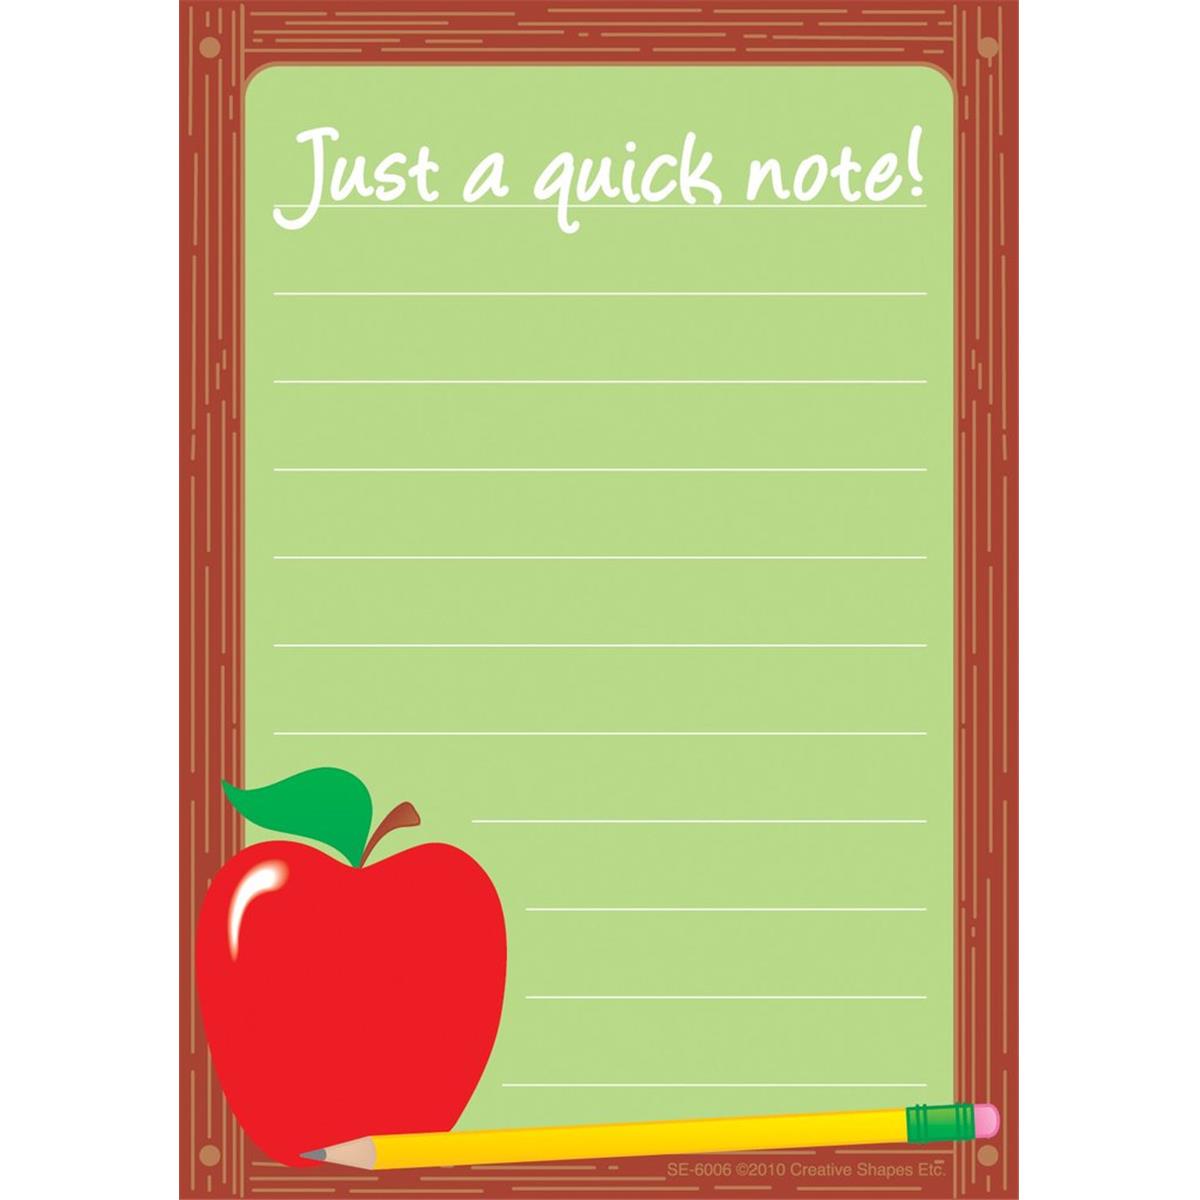 Se-6006 3.5 X 5 In. Notes & Quotes, A Quick Note - 35 Sheets Per Pack